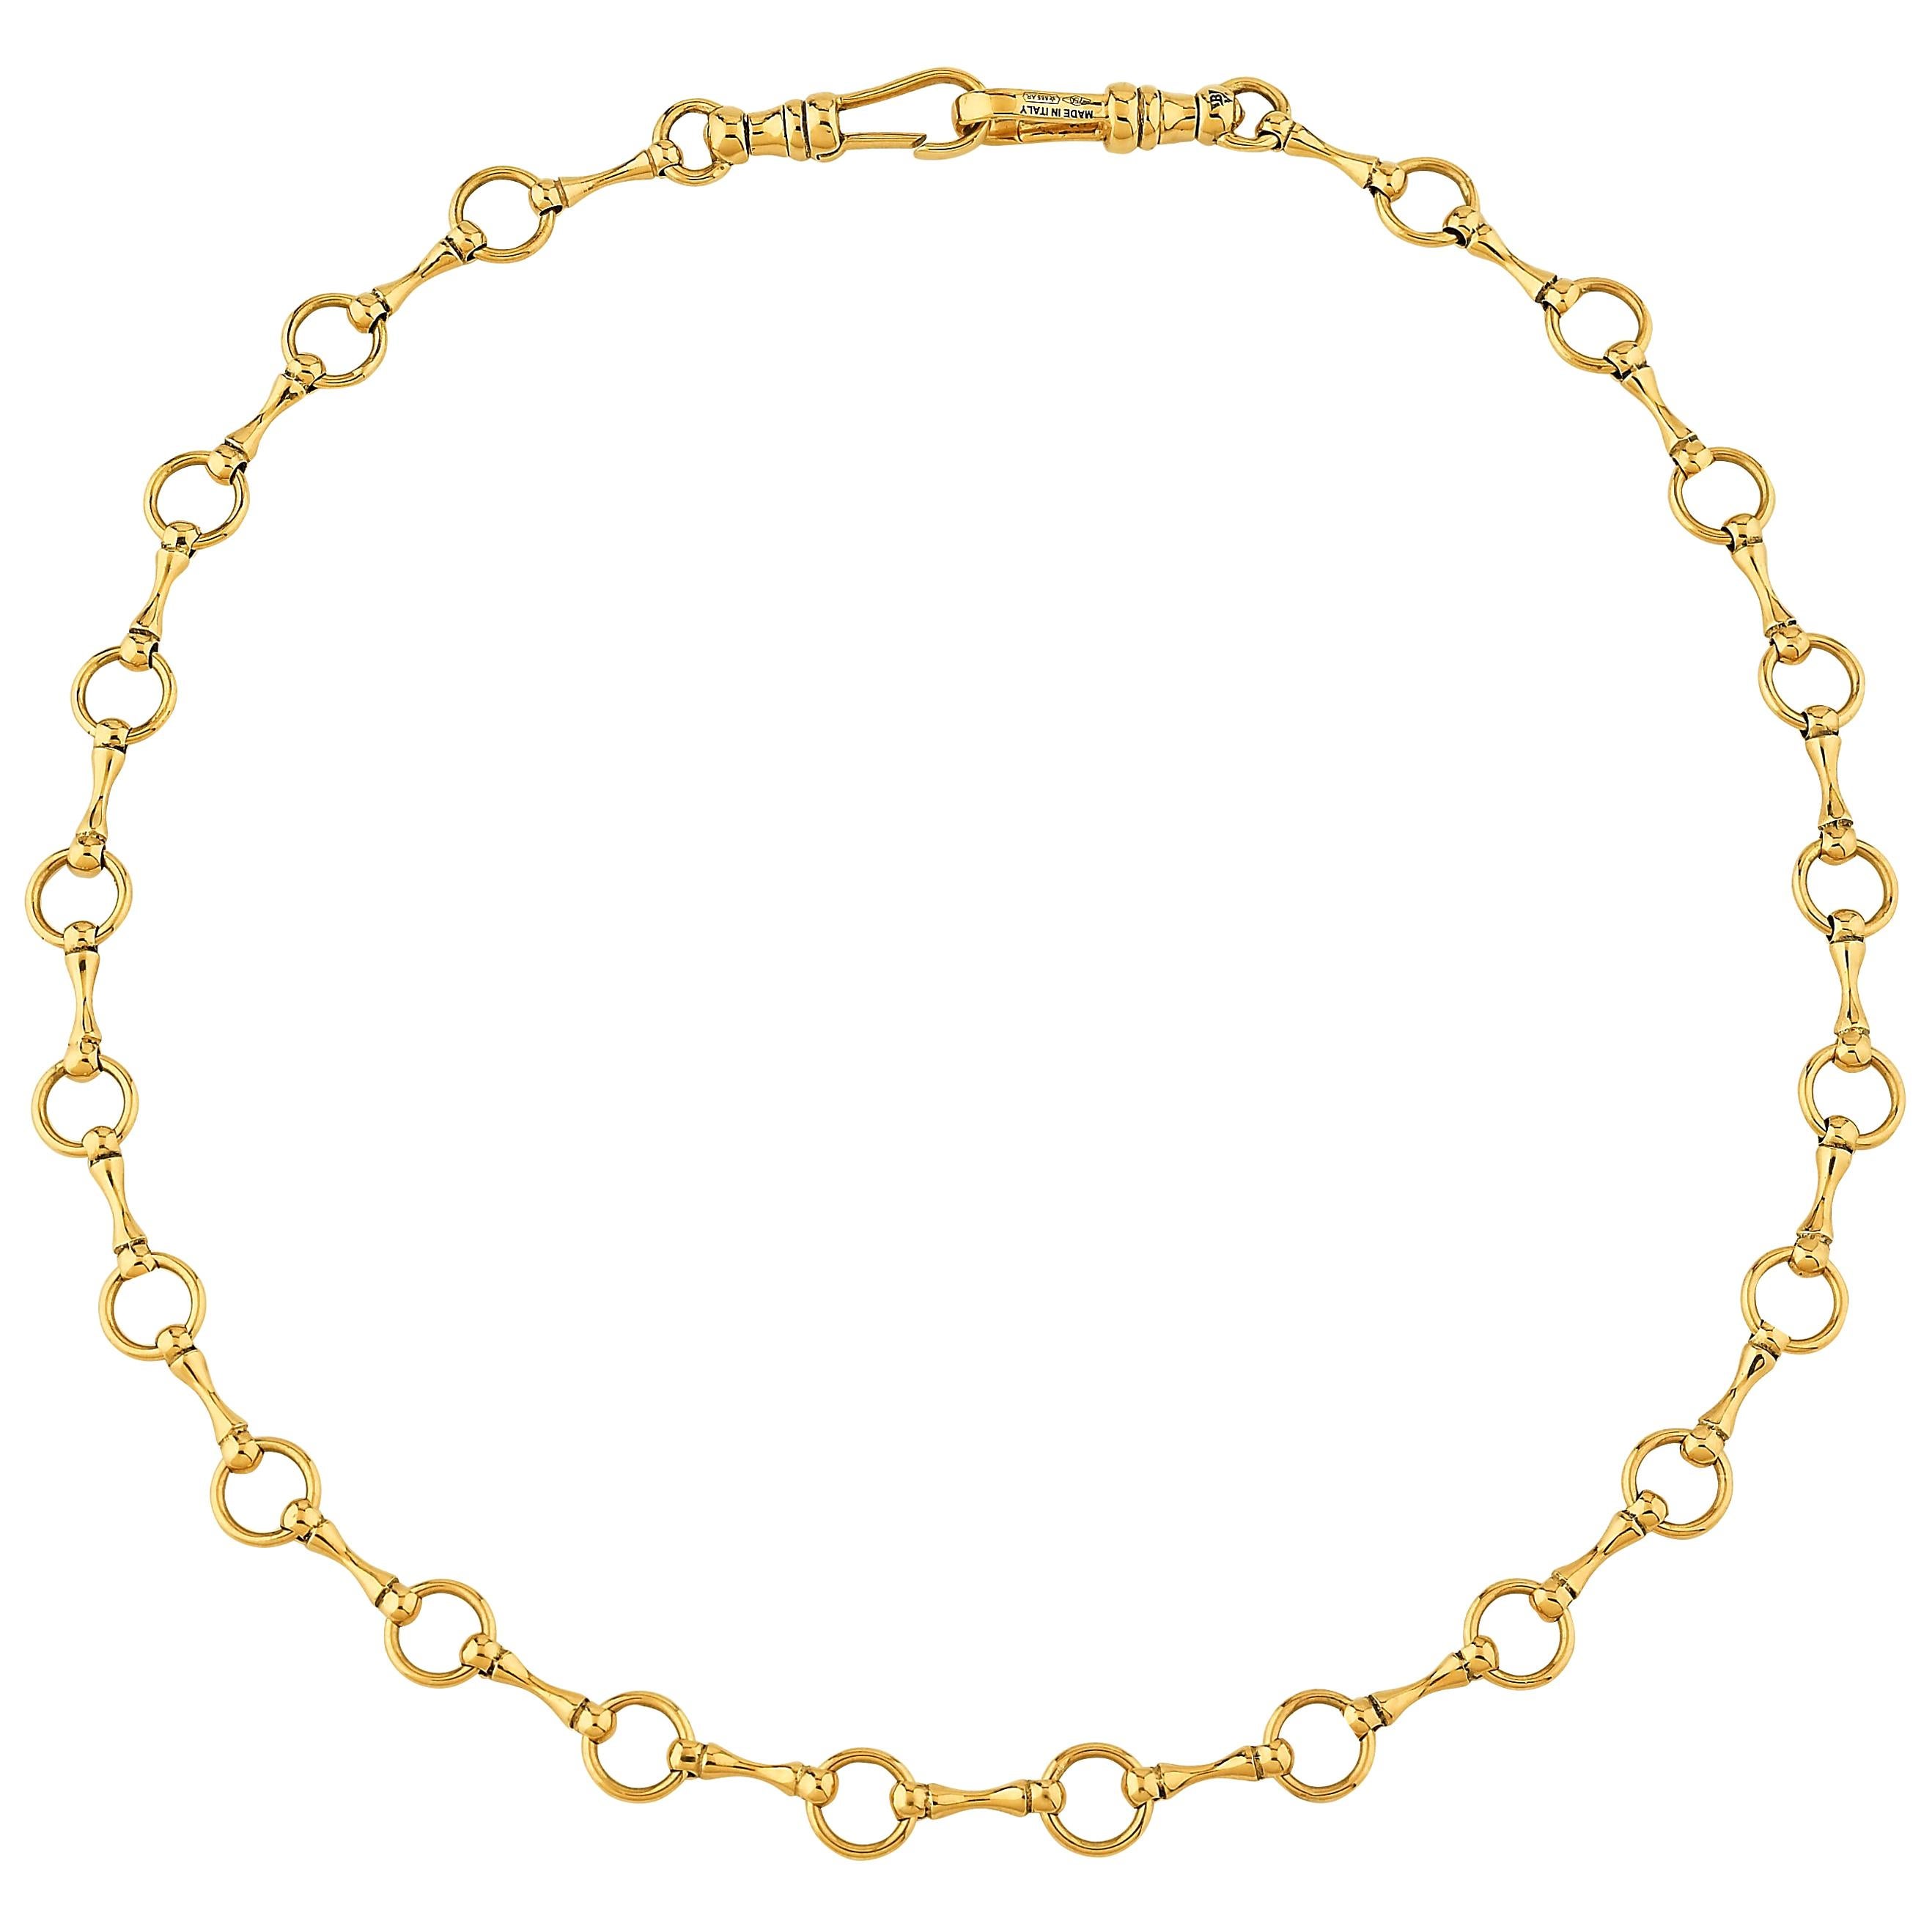 Betony Vernon "O'Ring Signature Chain Necklace" Necklace 18 Karat Gold For Sale